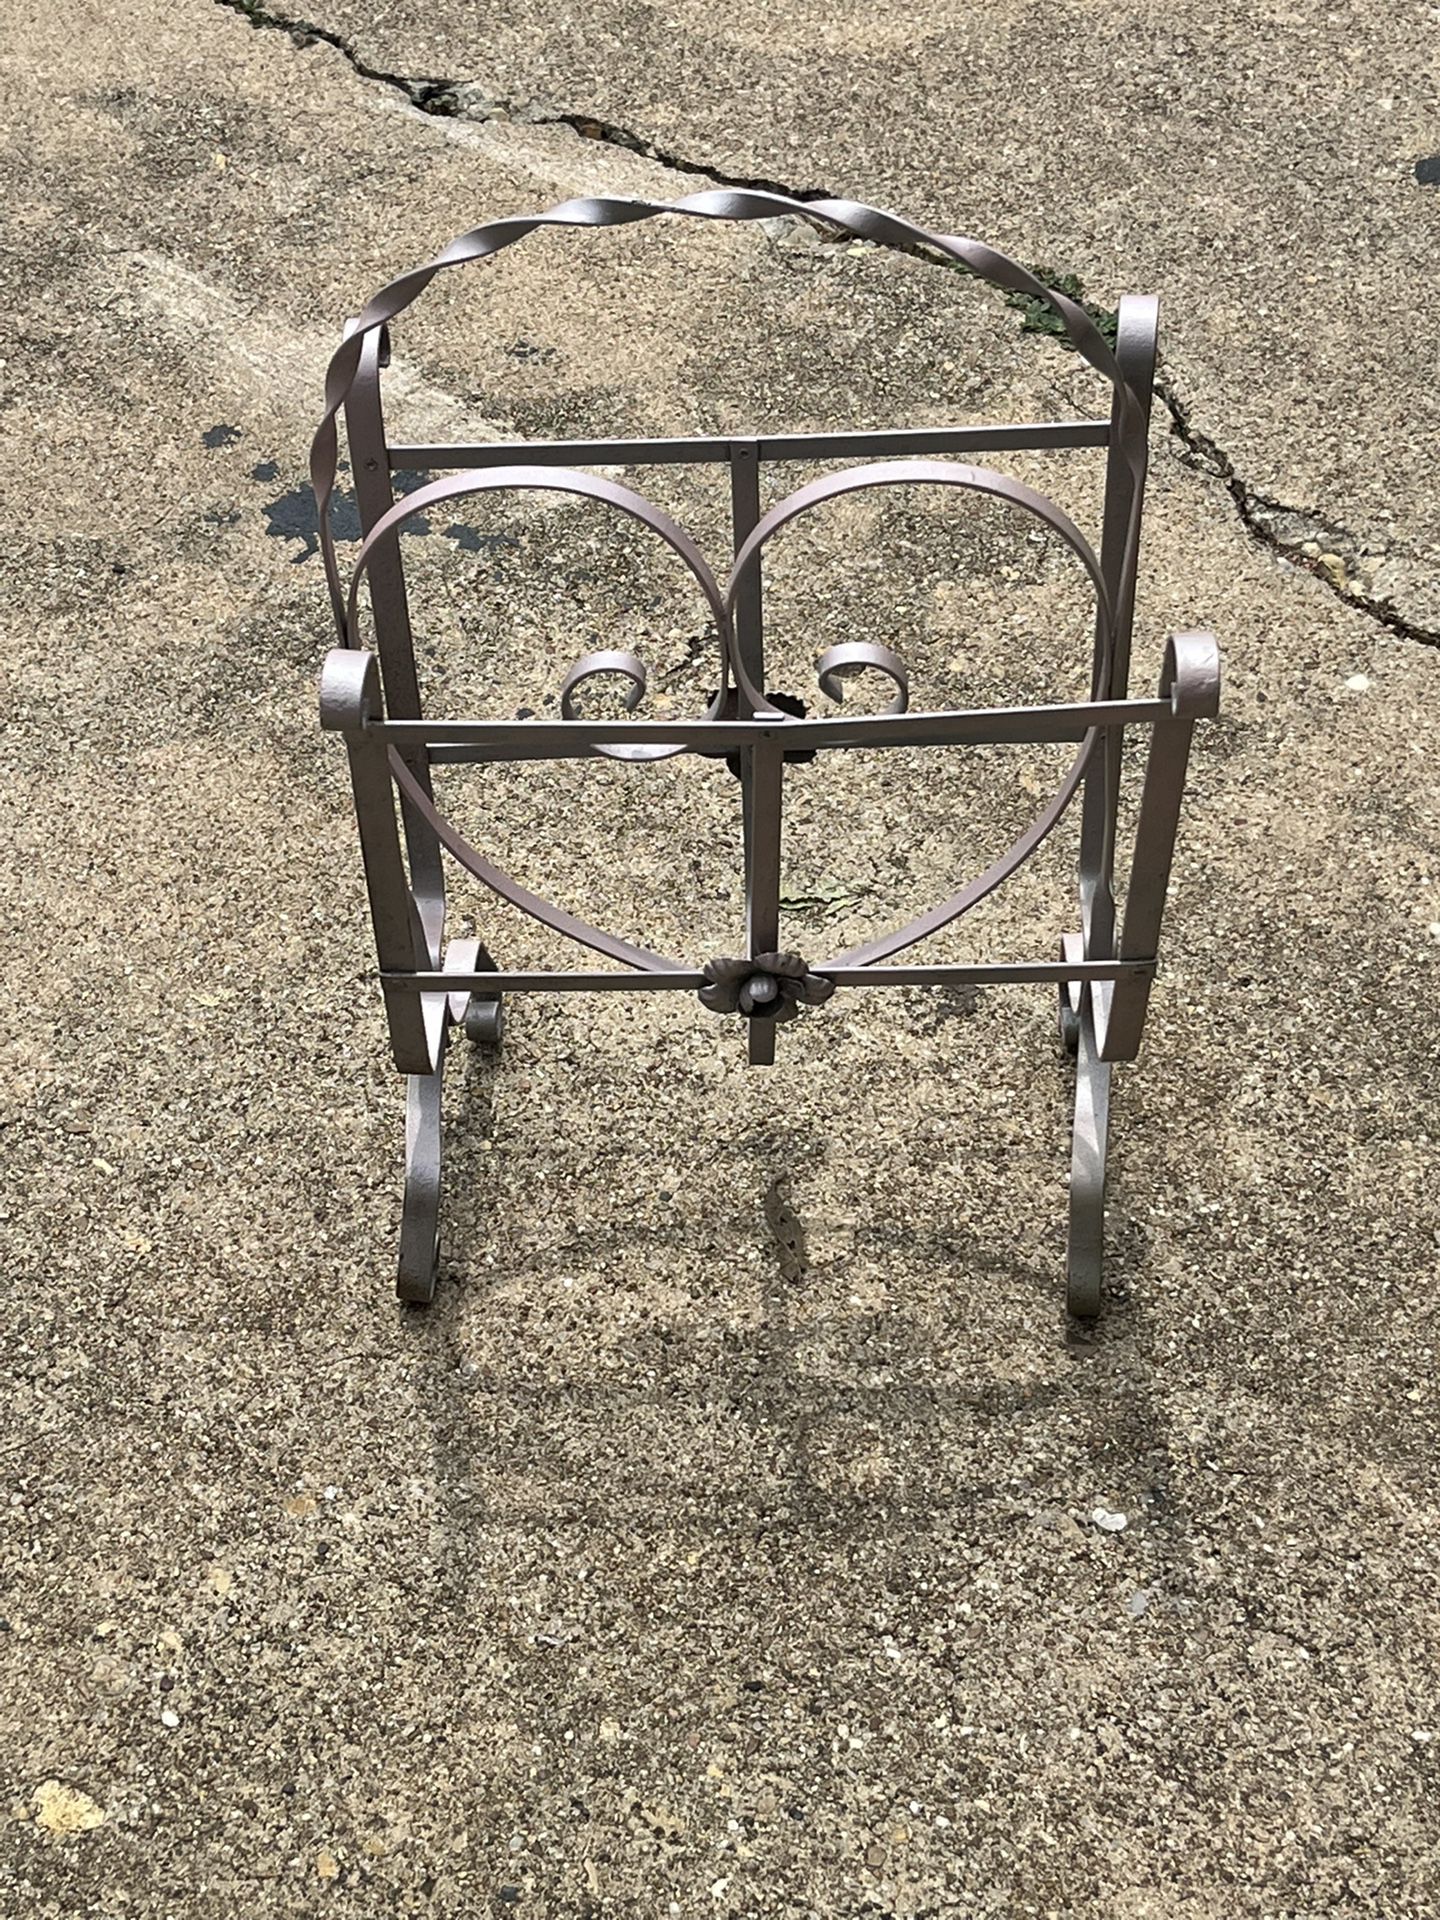 Antique Magazine Rack Or Great For Baking Pans Size 18” X 10